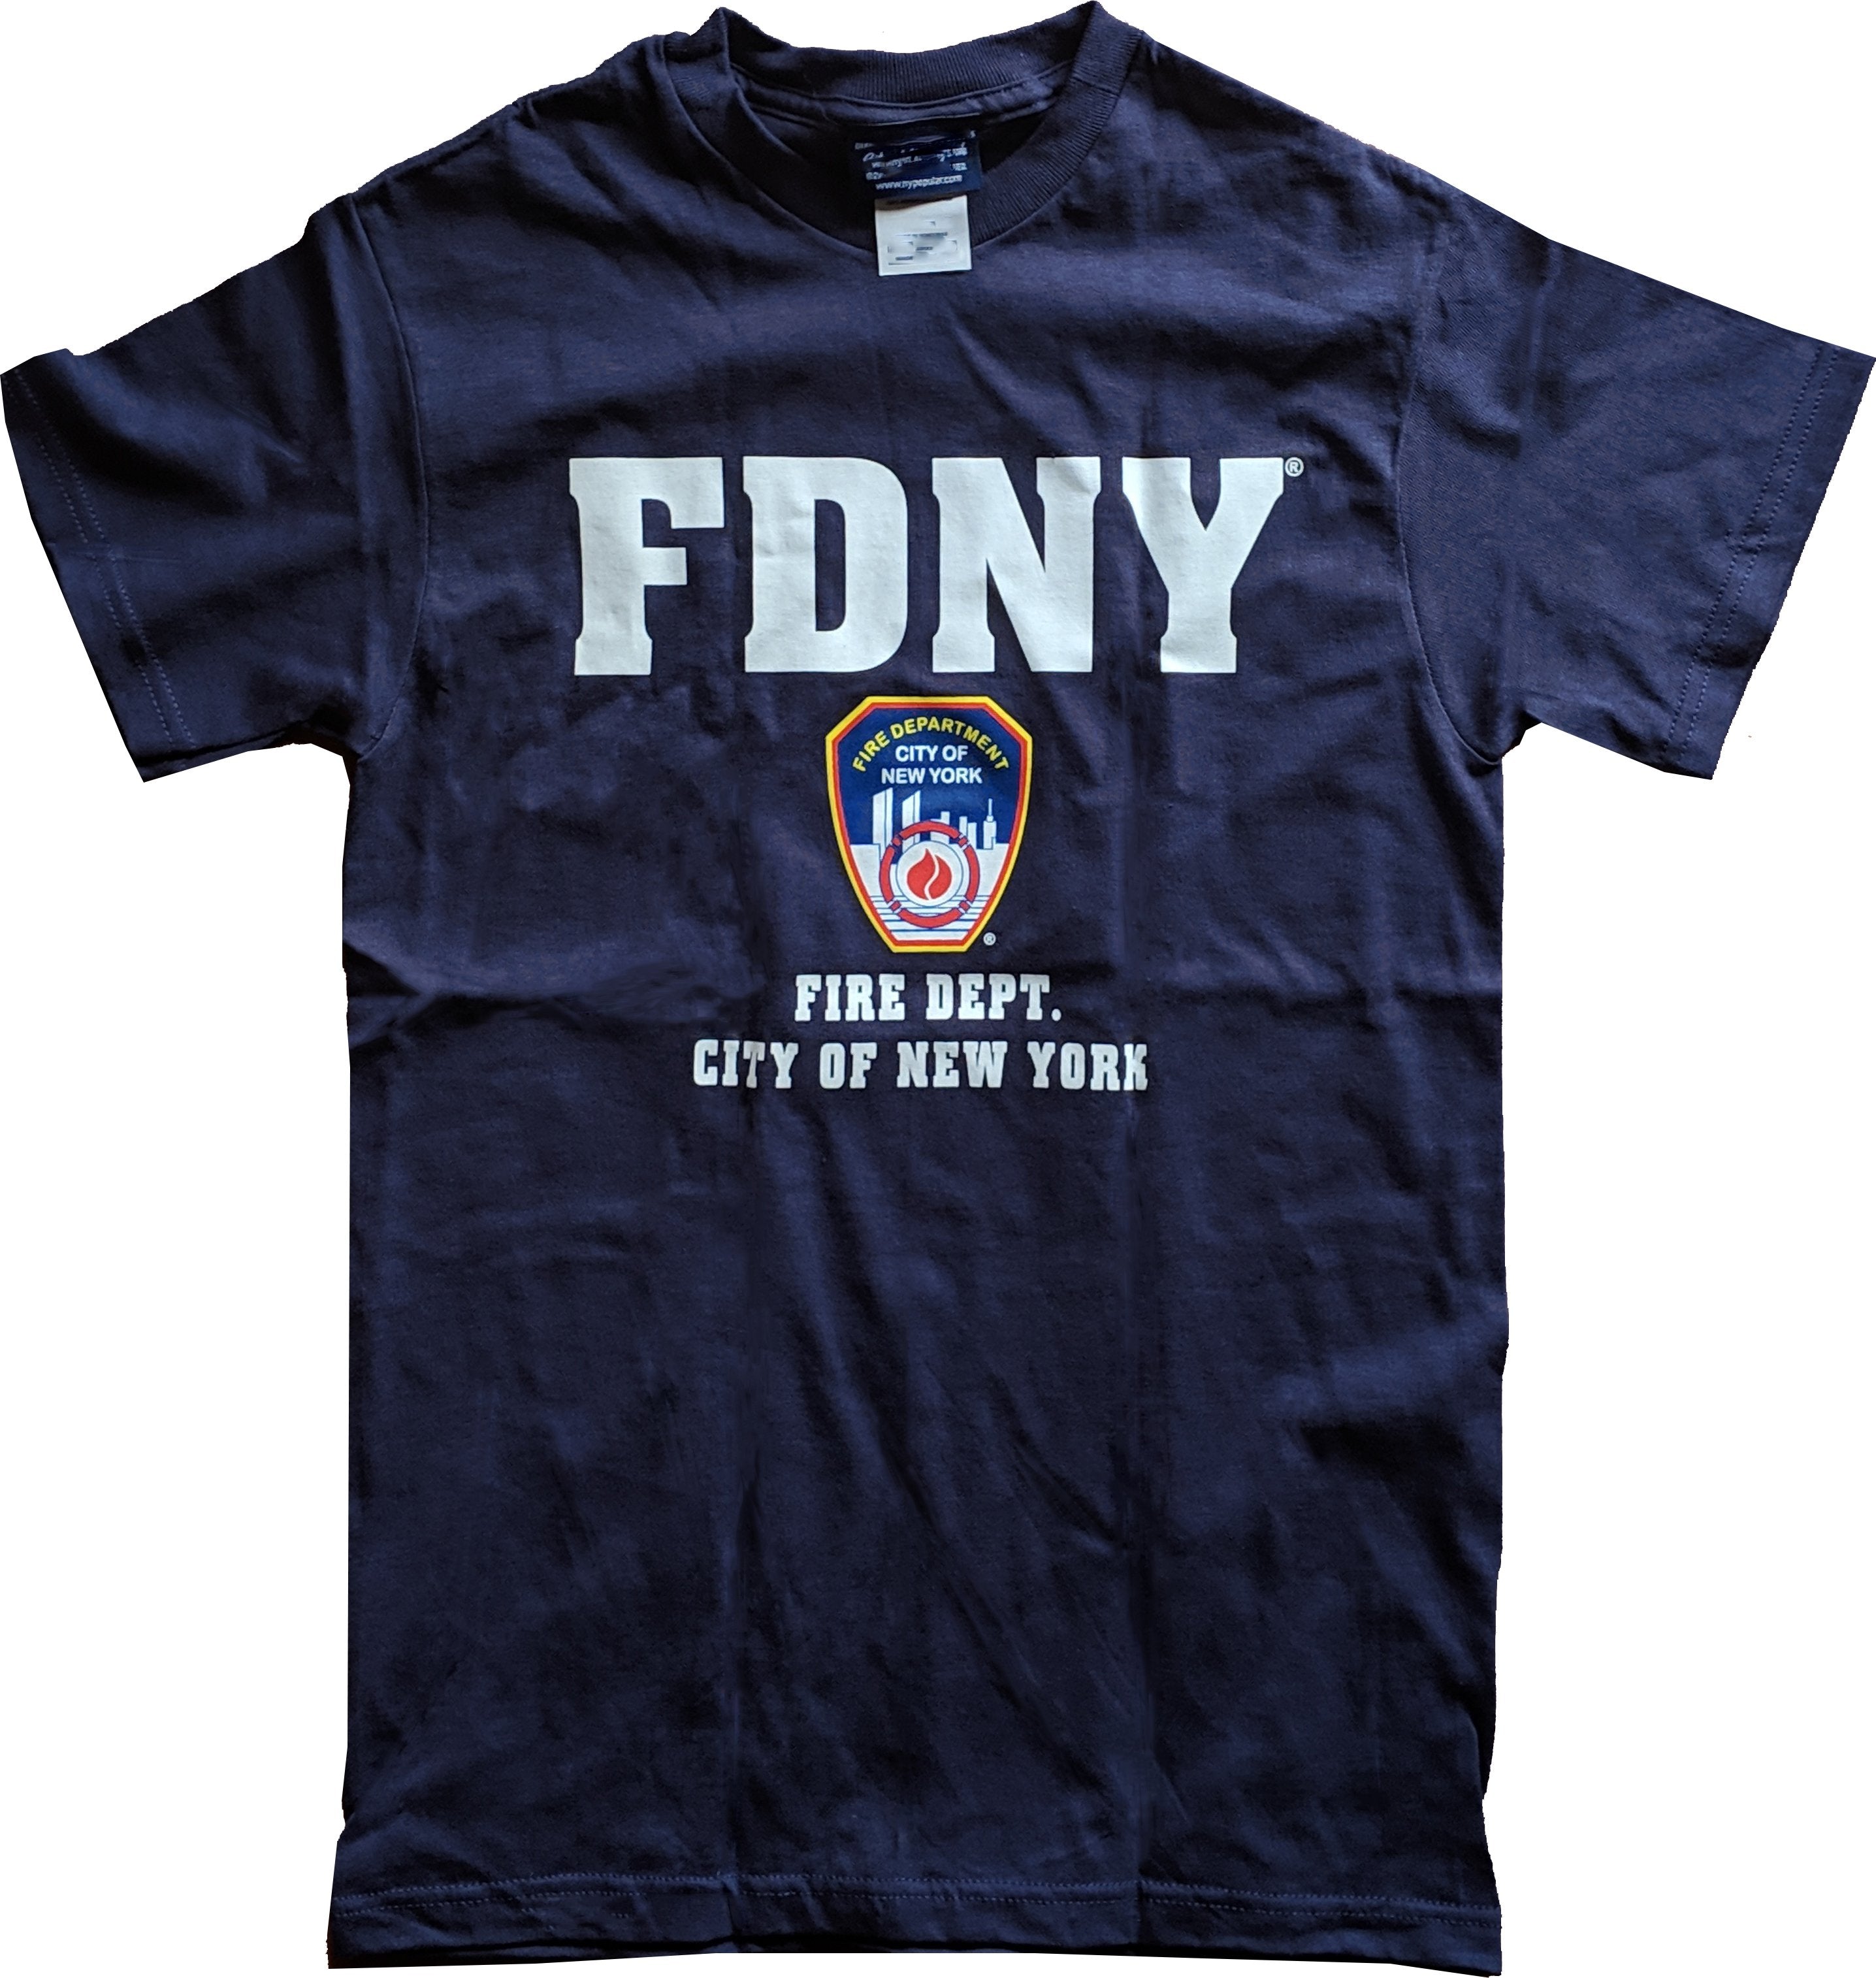 Support the Bravest: Men's FDNY Tee for Fire Department Fans